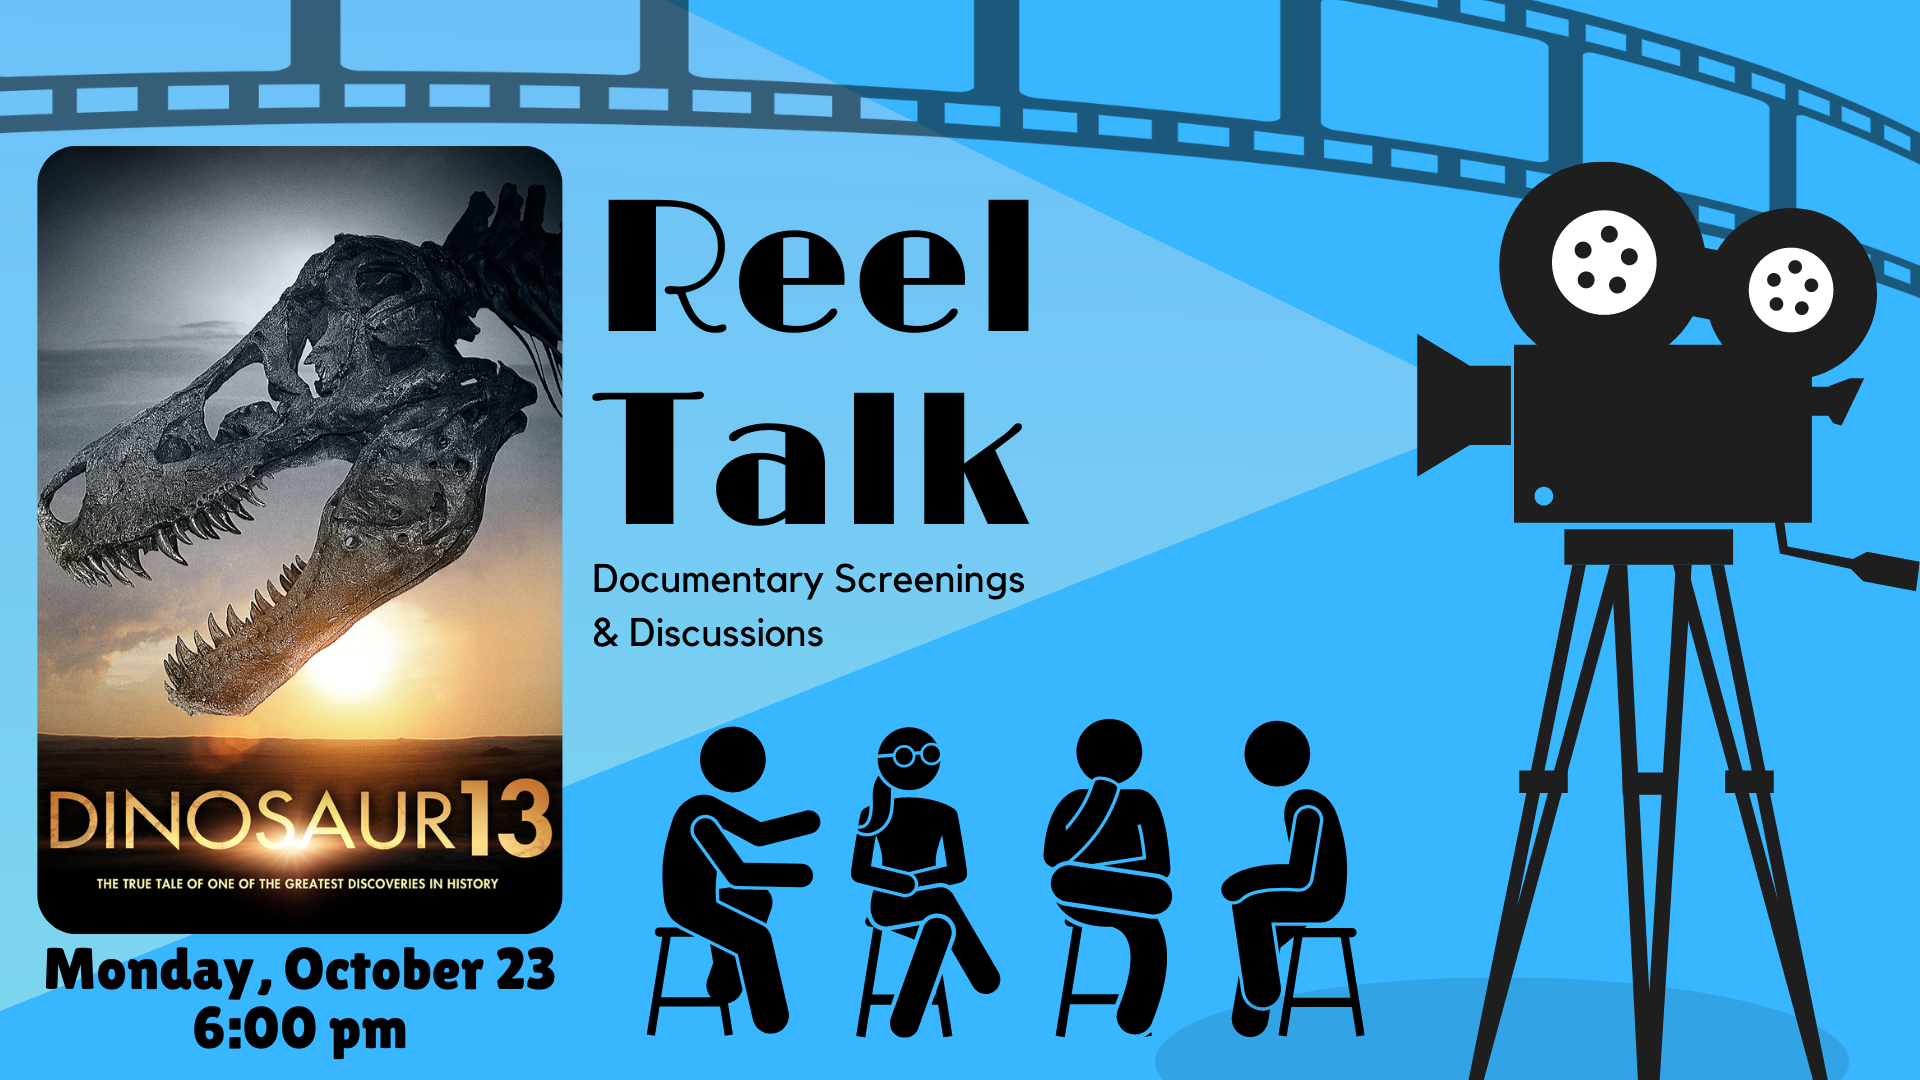 An old timey film projector casts a light on the name of the program, "Reel Talk: documentary screenings & discussion".  A reel of film appears in the background.  A group of 4 figures sit in chairs, as if in discussion, under the text.  The film poster image appears on the left.